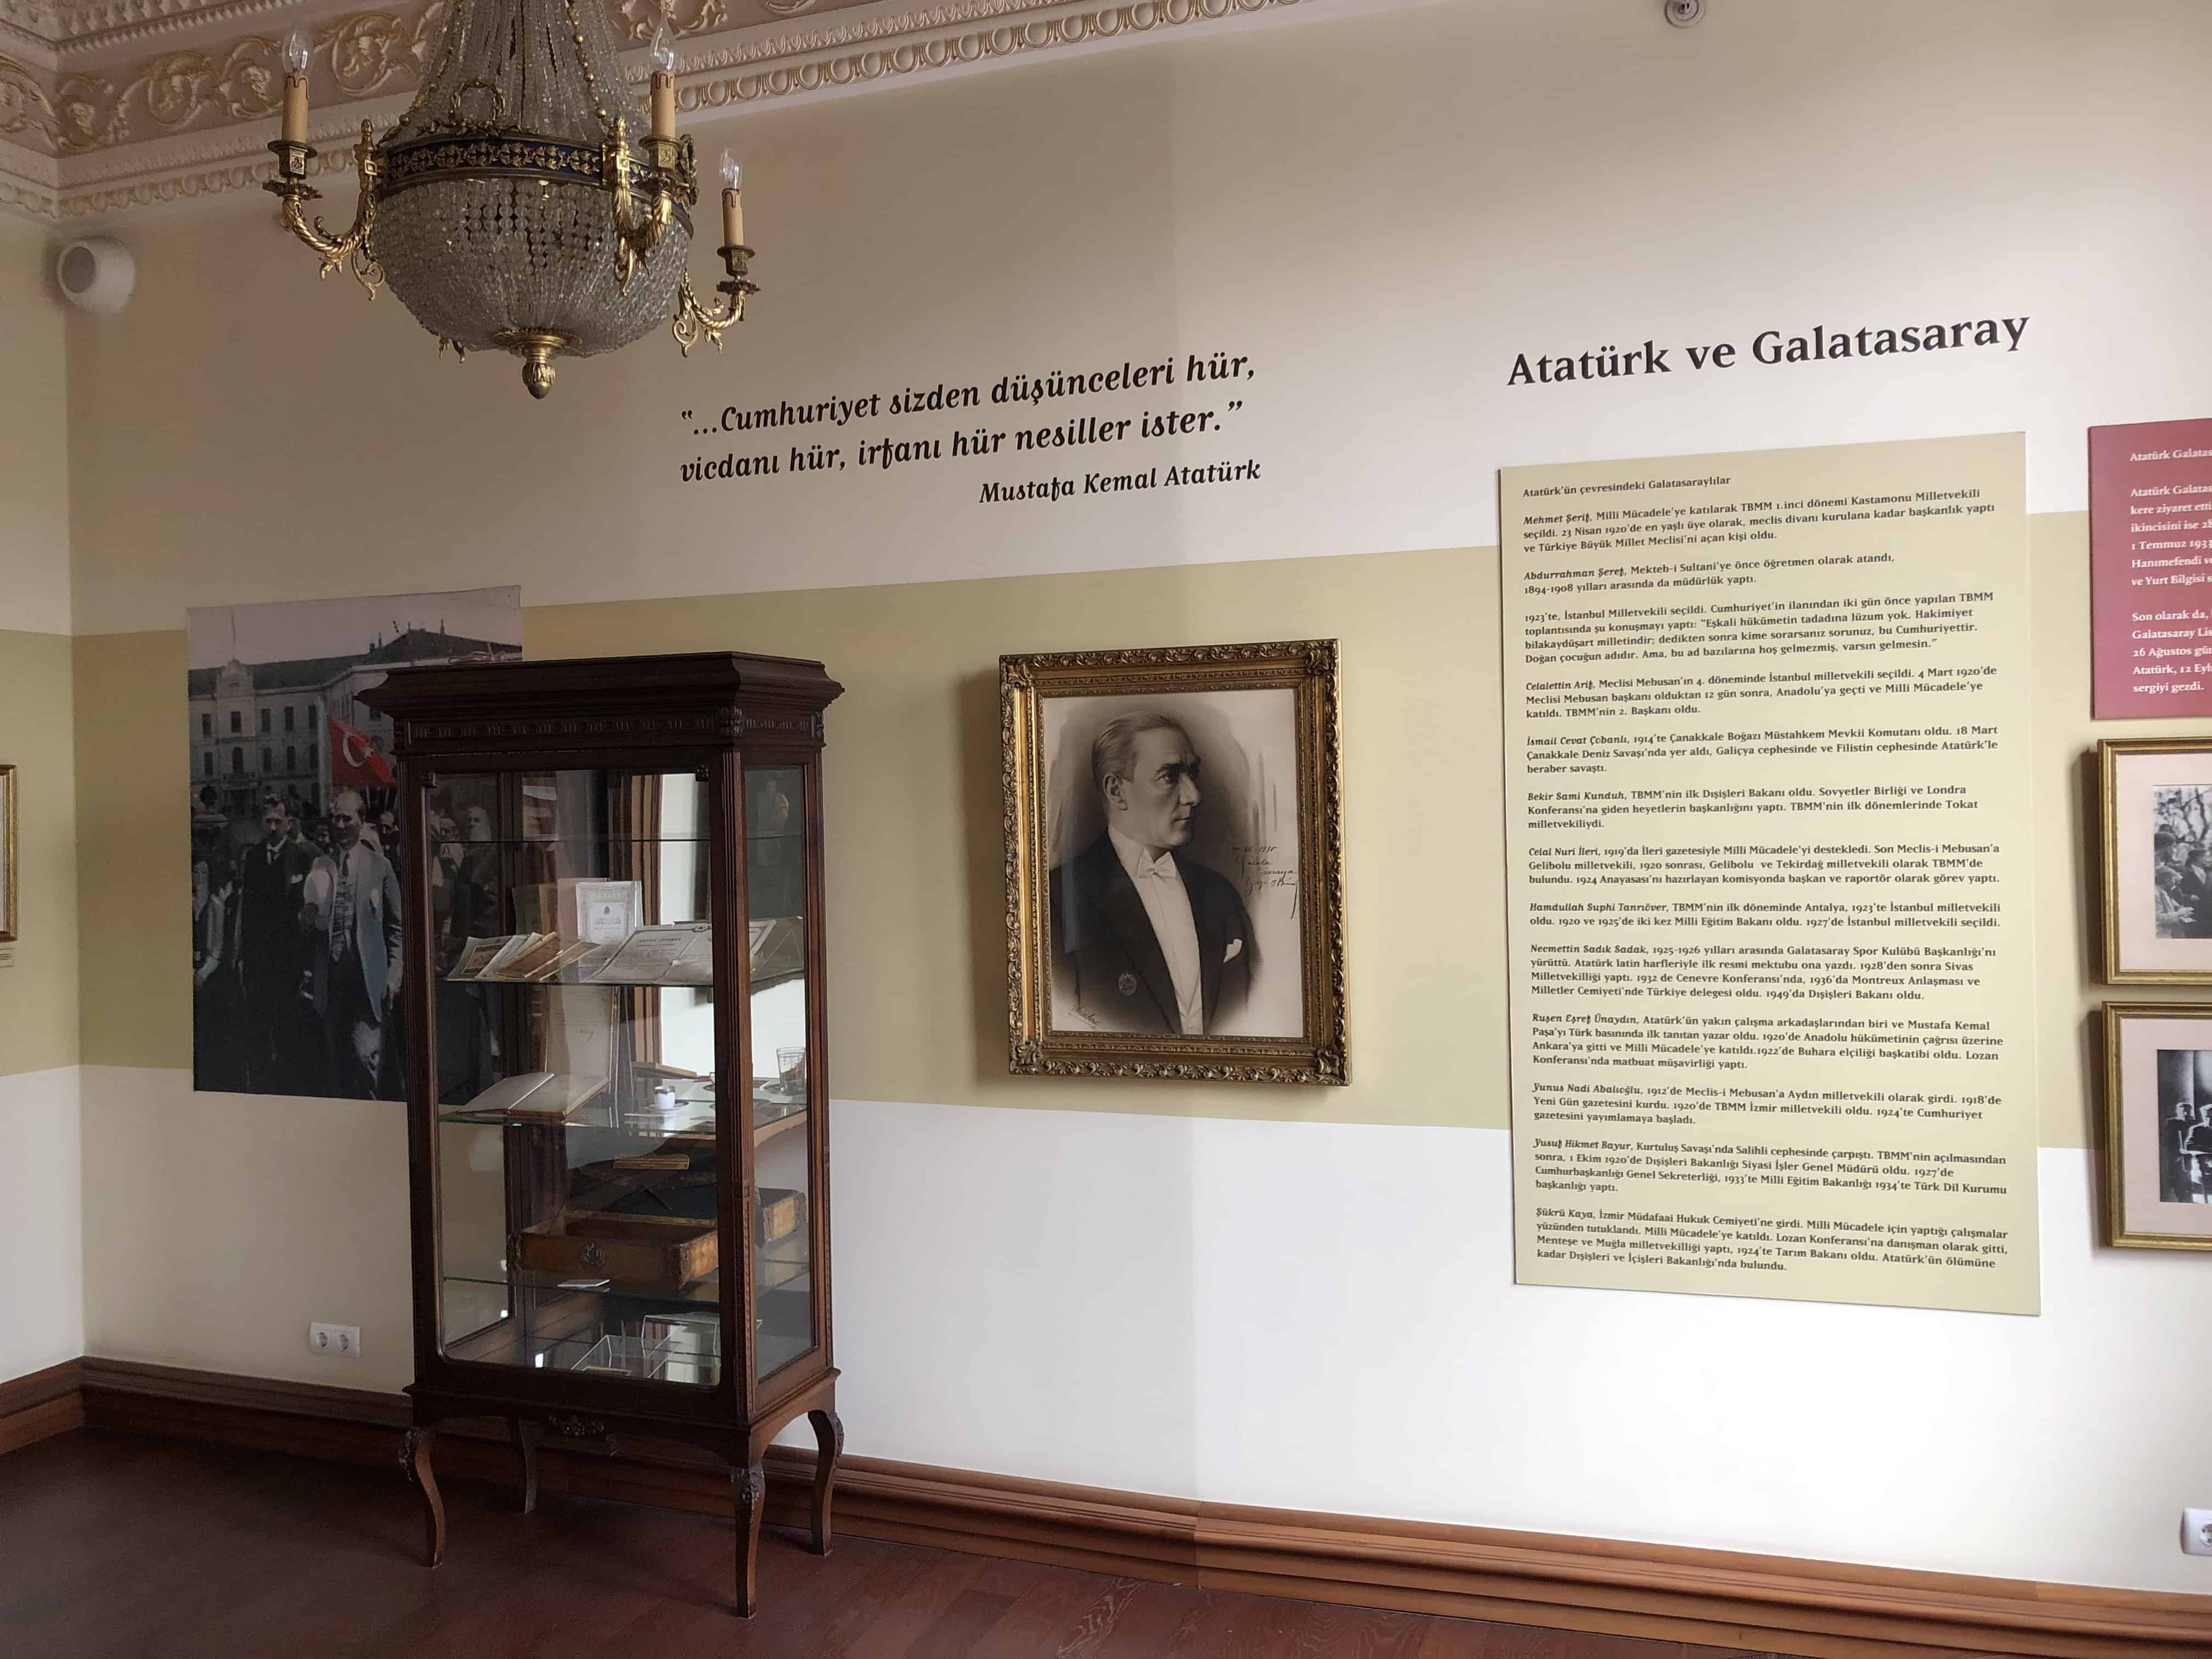 Atatürk section at the Galatasaray Museum